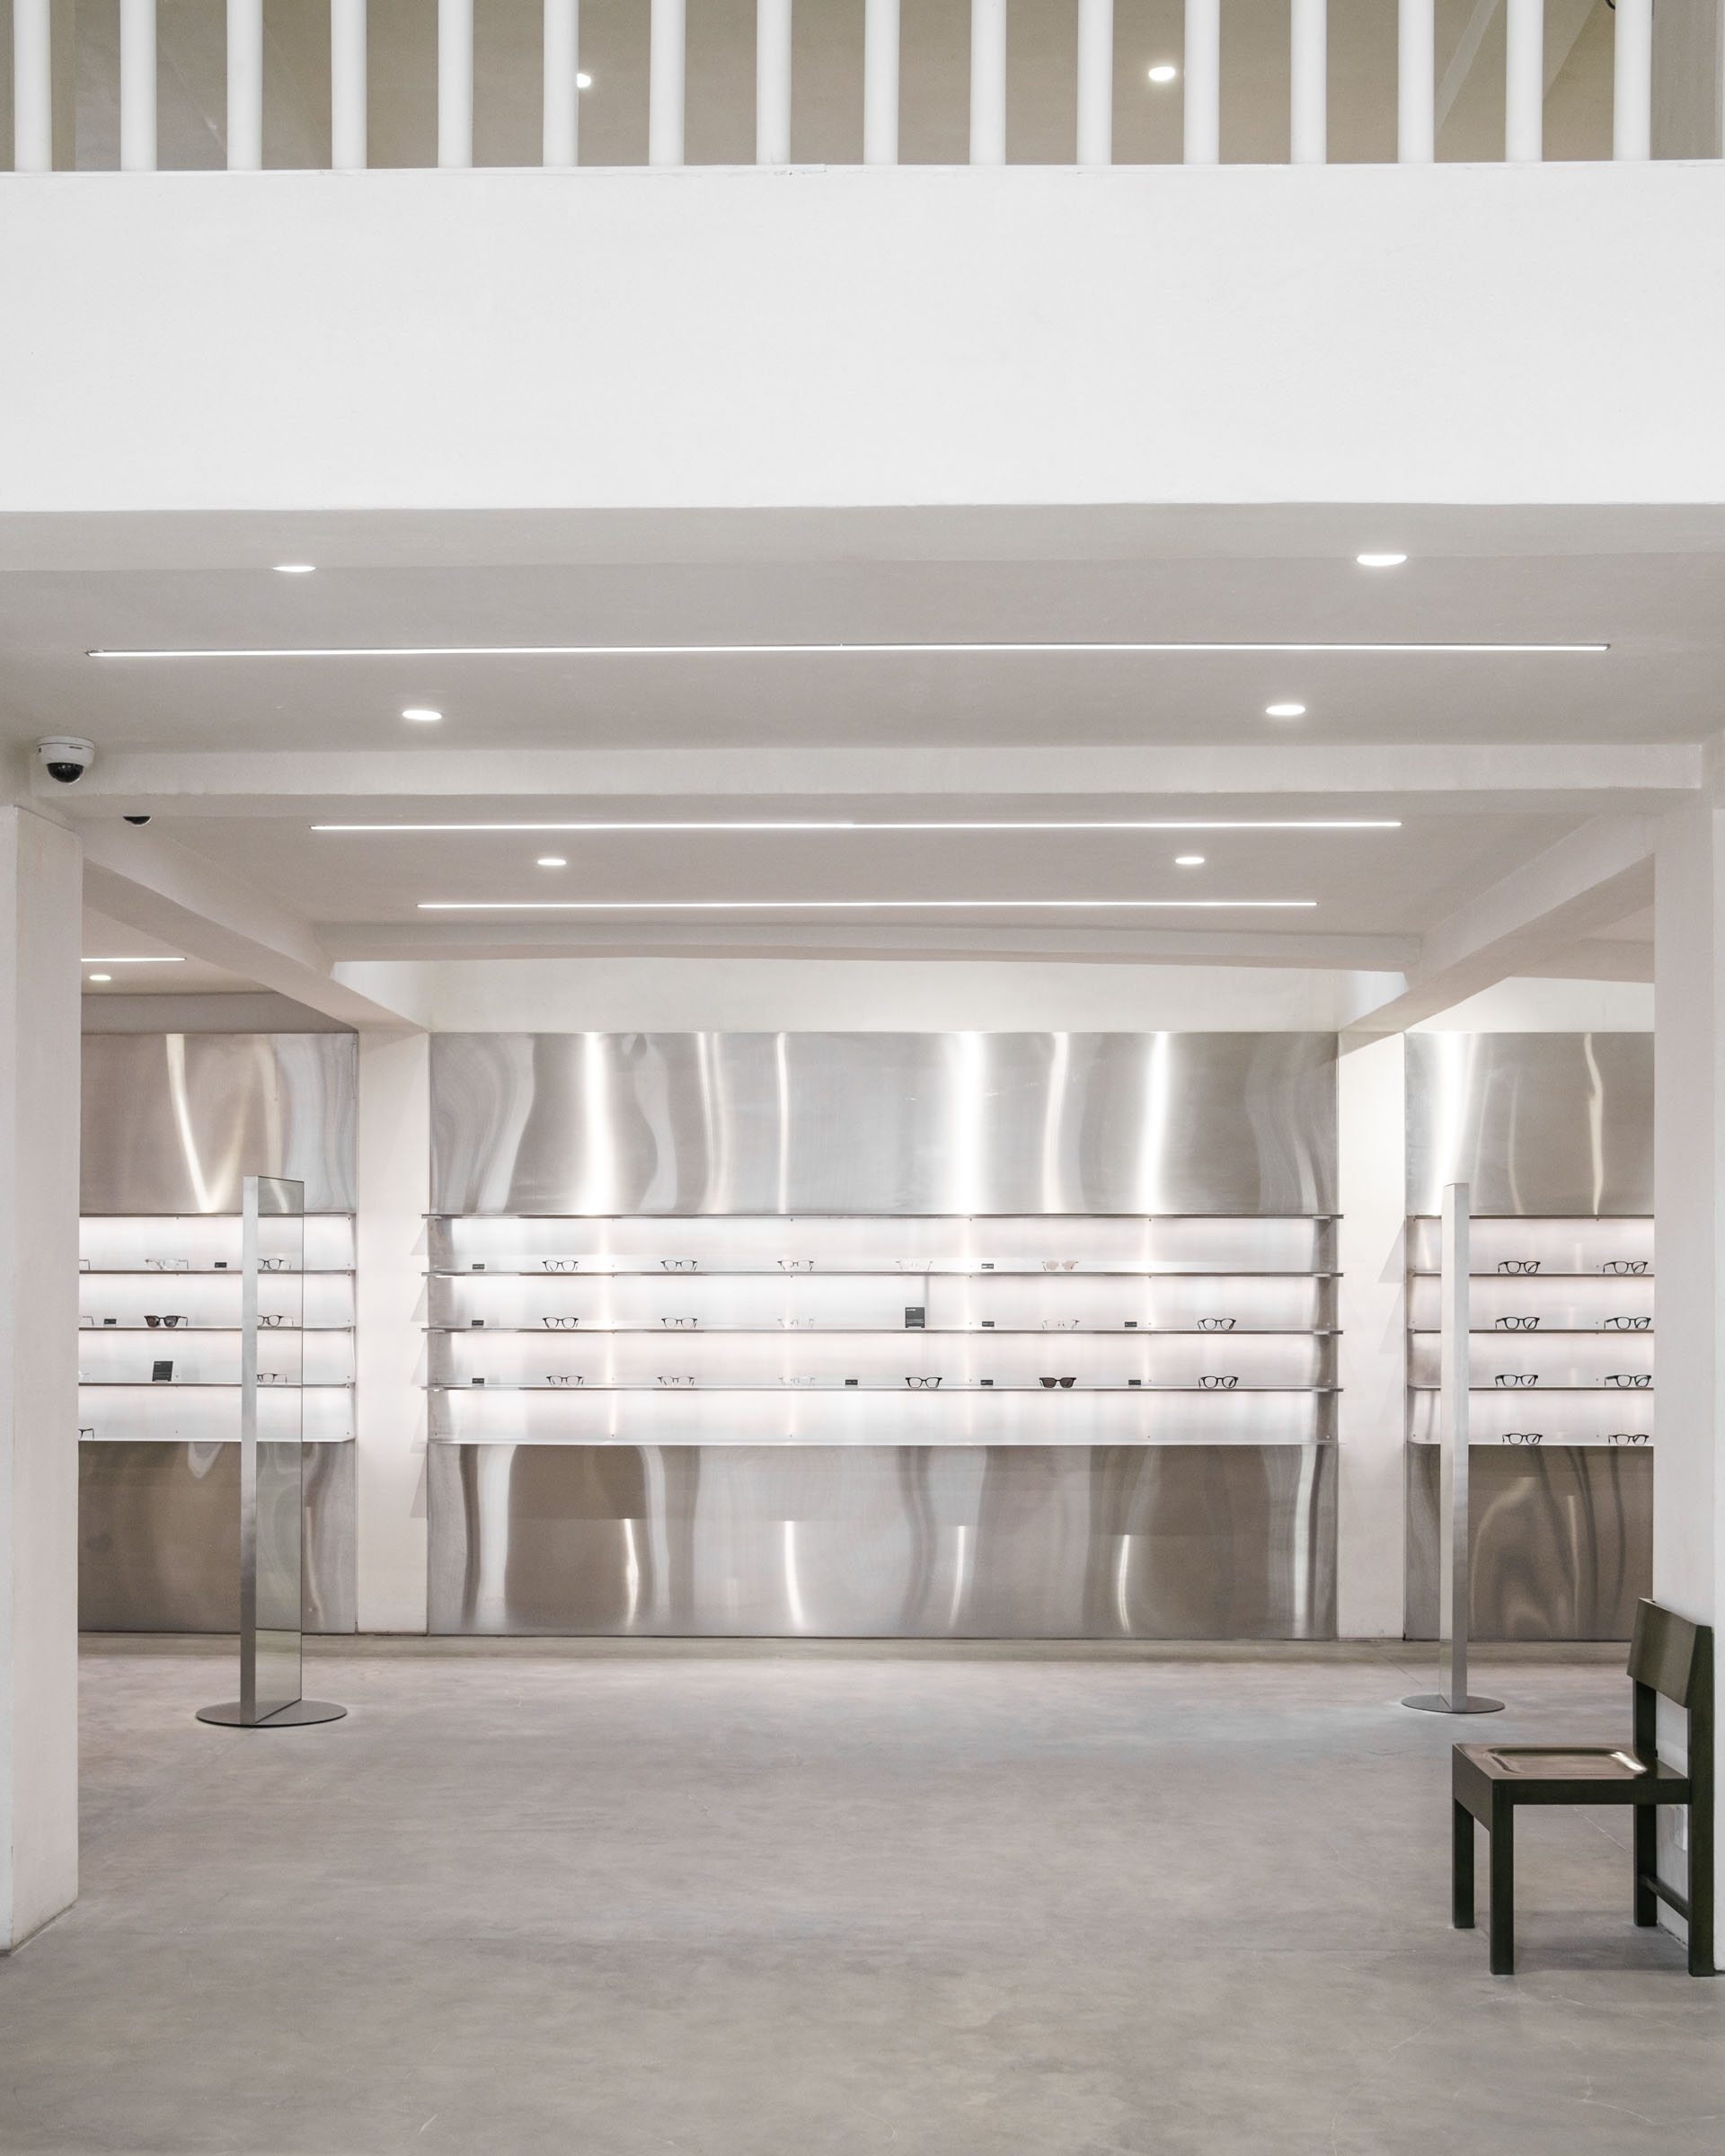 SEESON Eyewear's product showroom, optometry facility and cafe space in Saigon